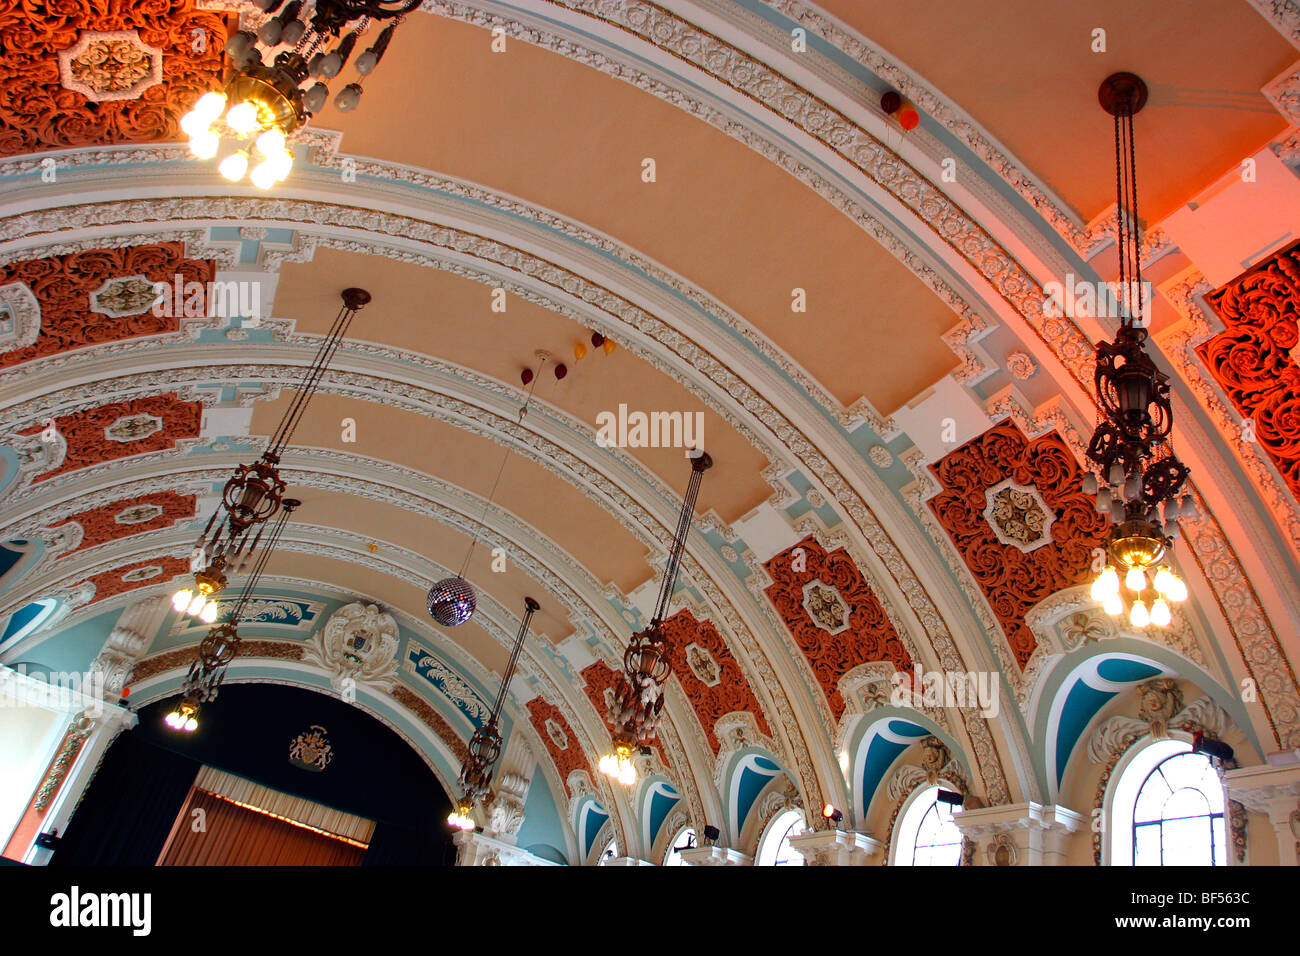 England, Cheshire, Stockport, Town Hall, ballroom ceiling of decoratively painted plasterwork Stock Photo